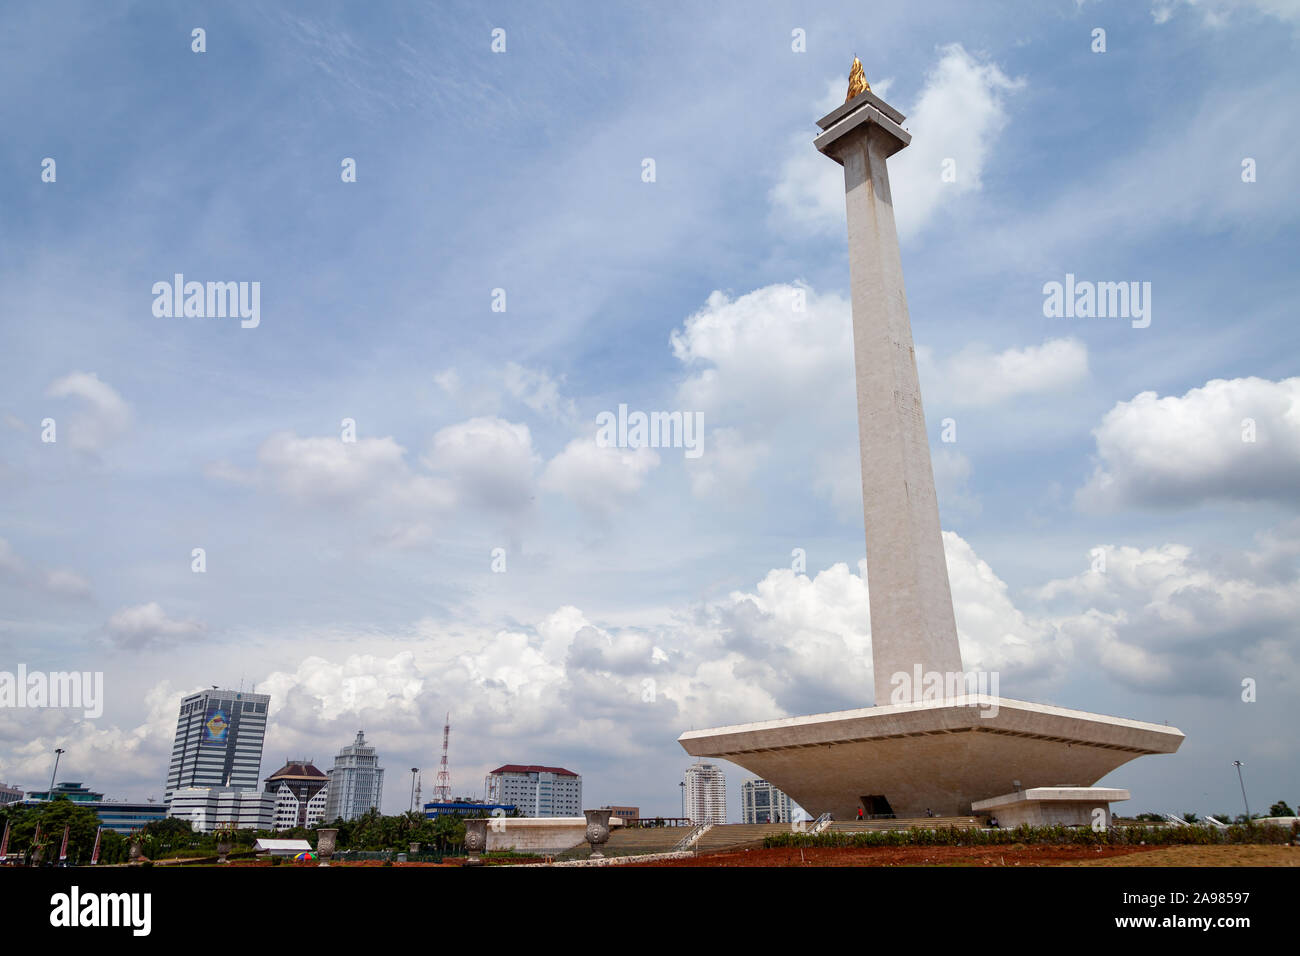 Monas the National Monument of Indonesia located on Merdeka  Square. It symbolized the independence of Indonesia. It's located in Jakarta. Monas stand Stock Photo